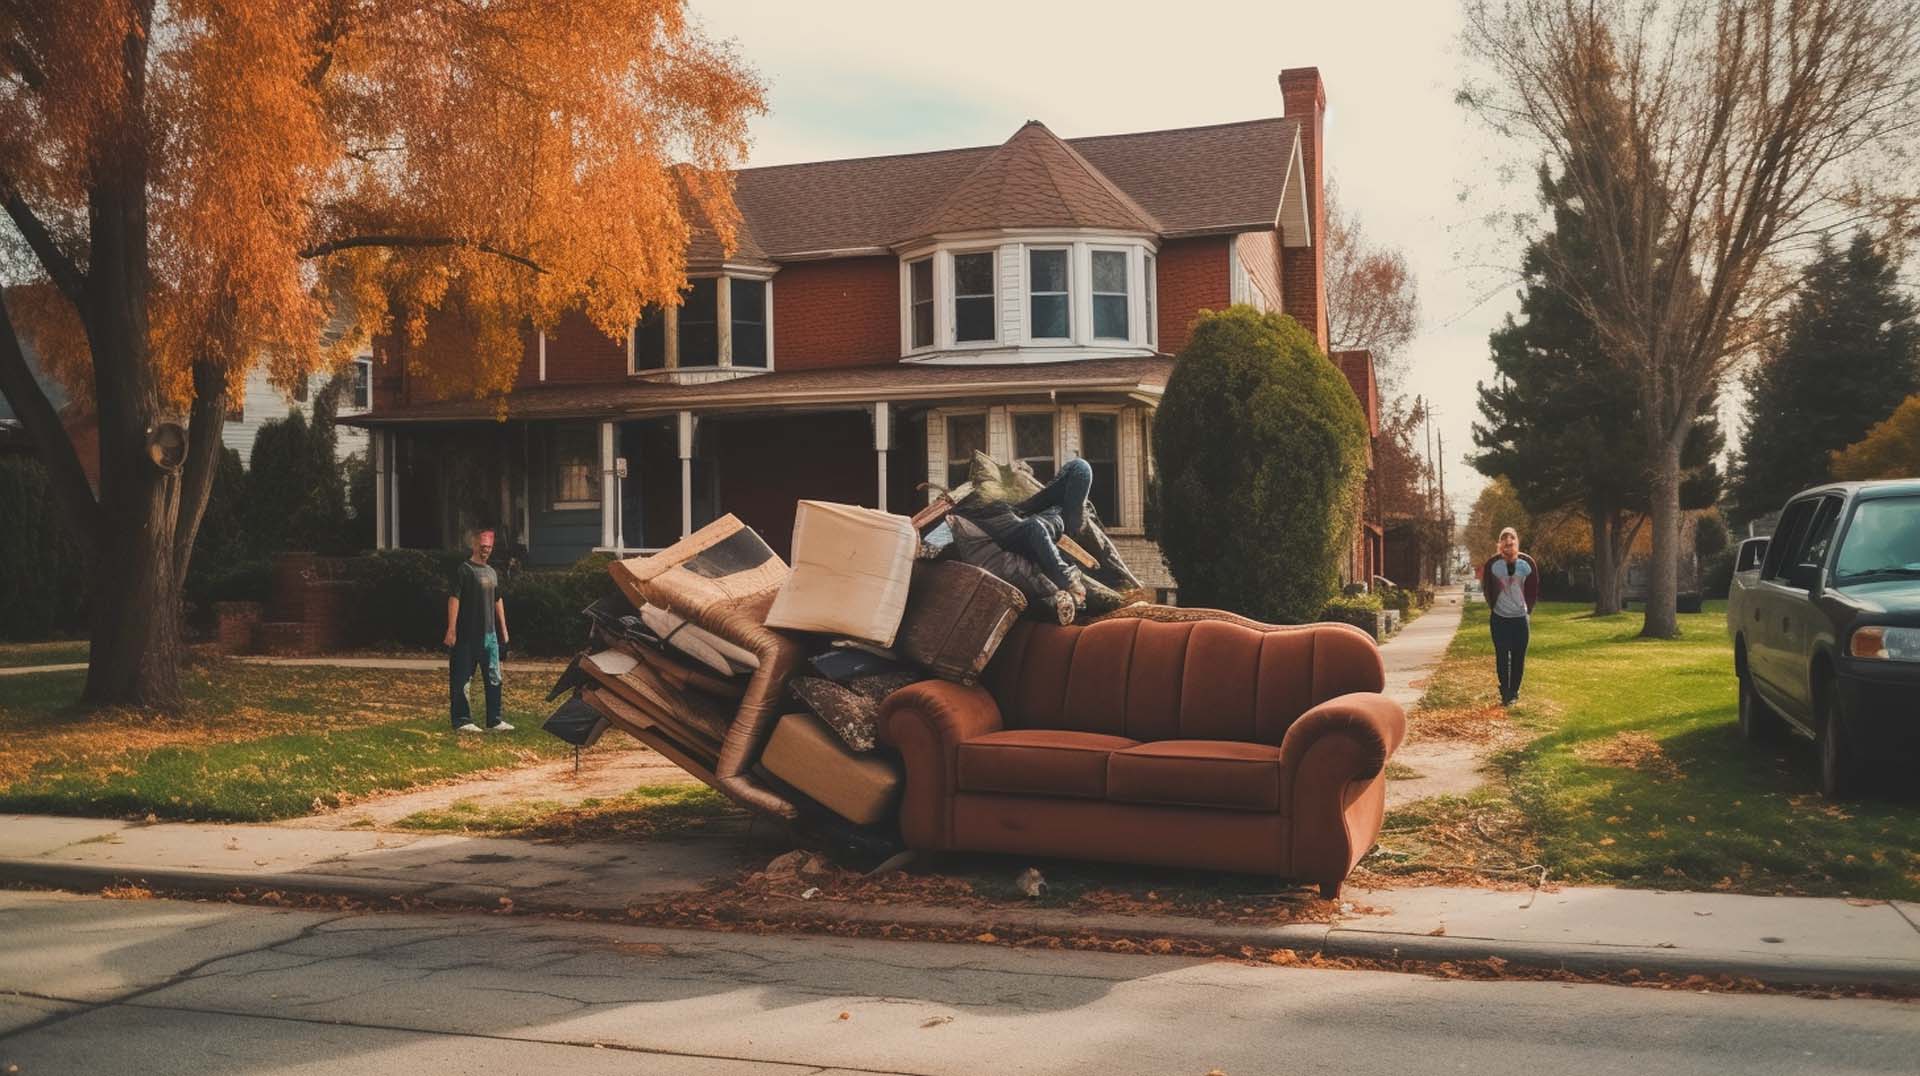 Residential Junk Removal Services in Midland